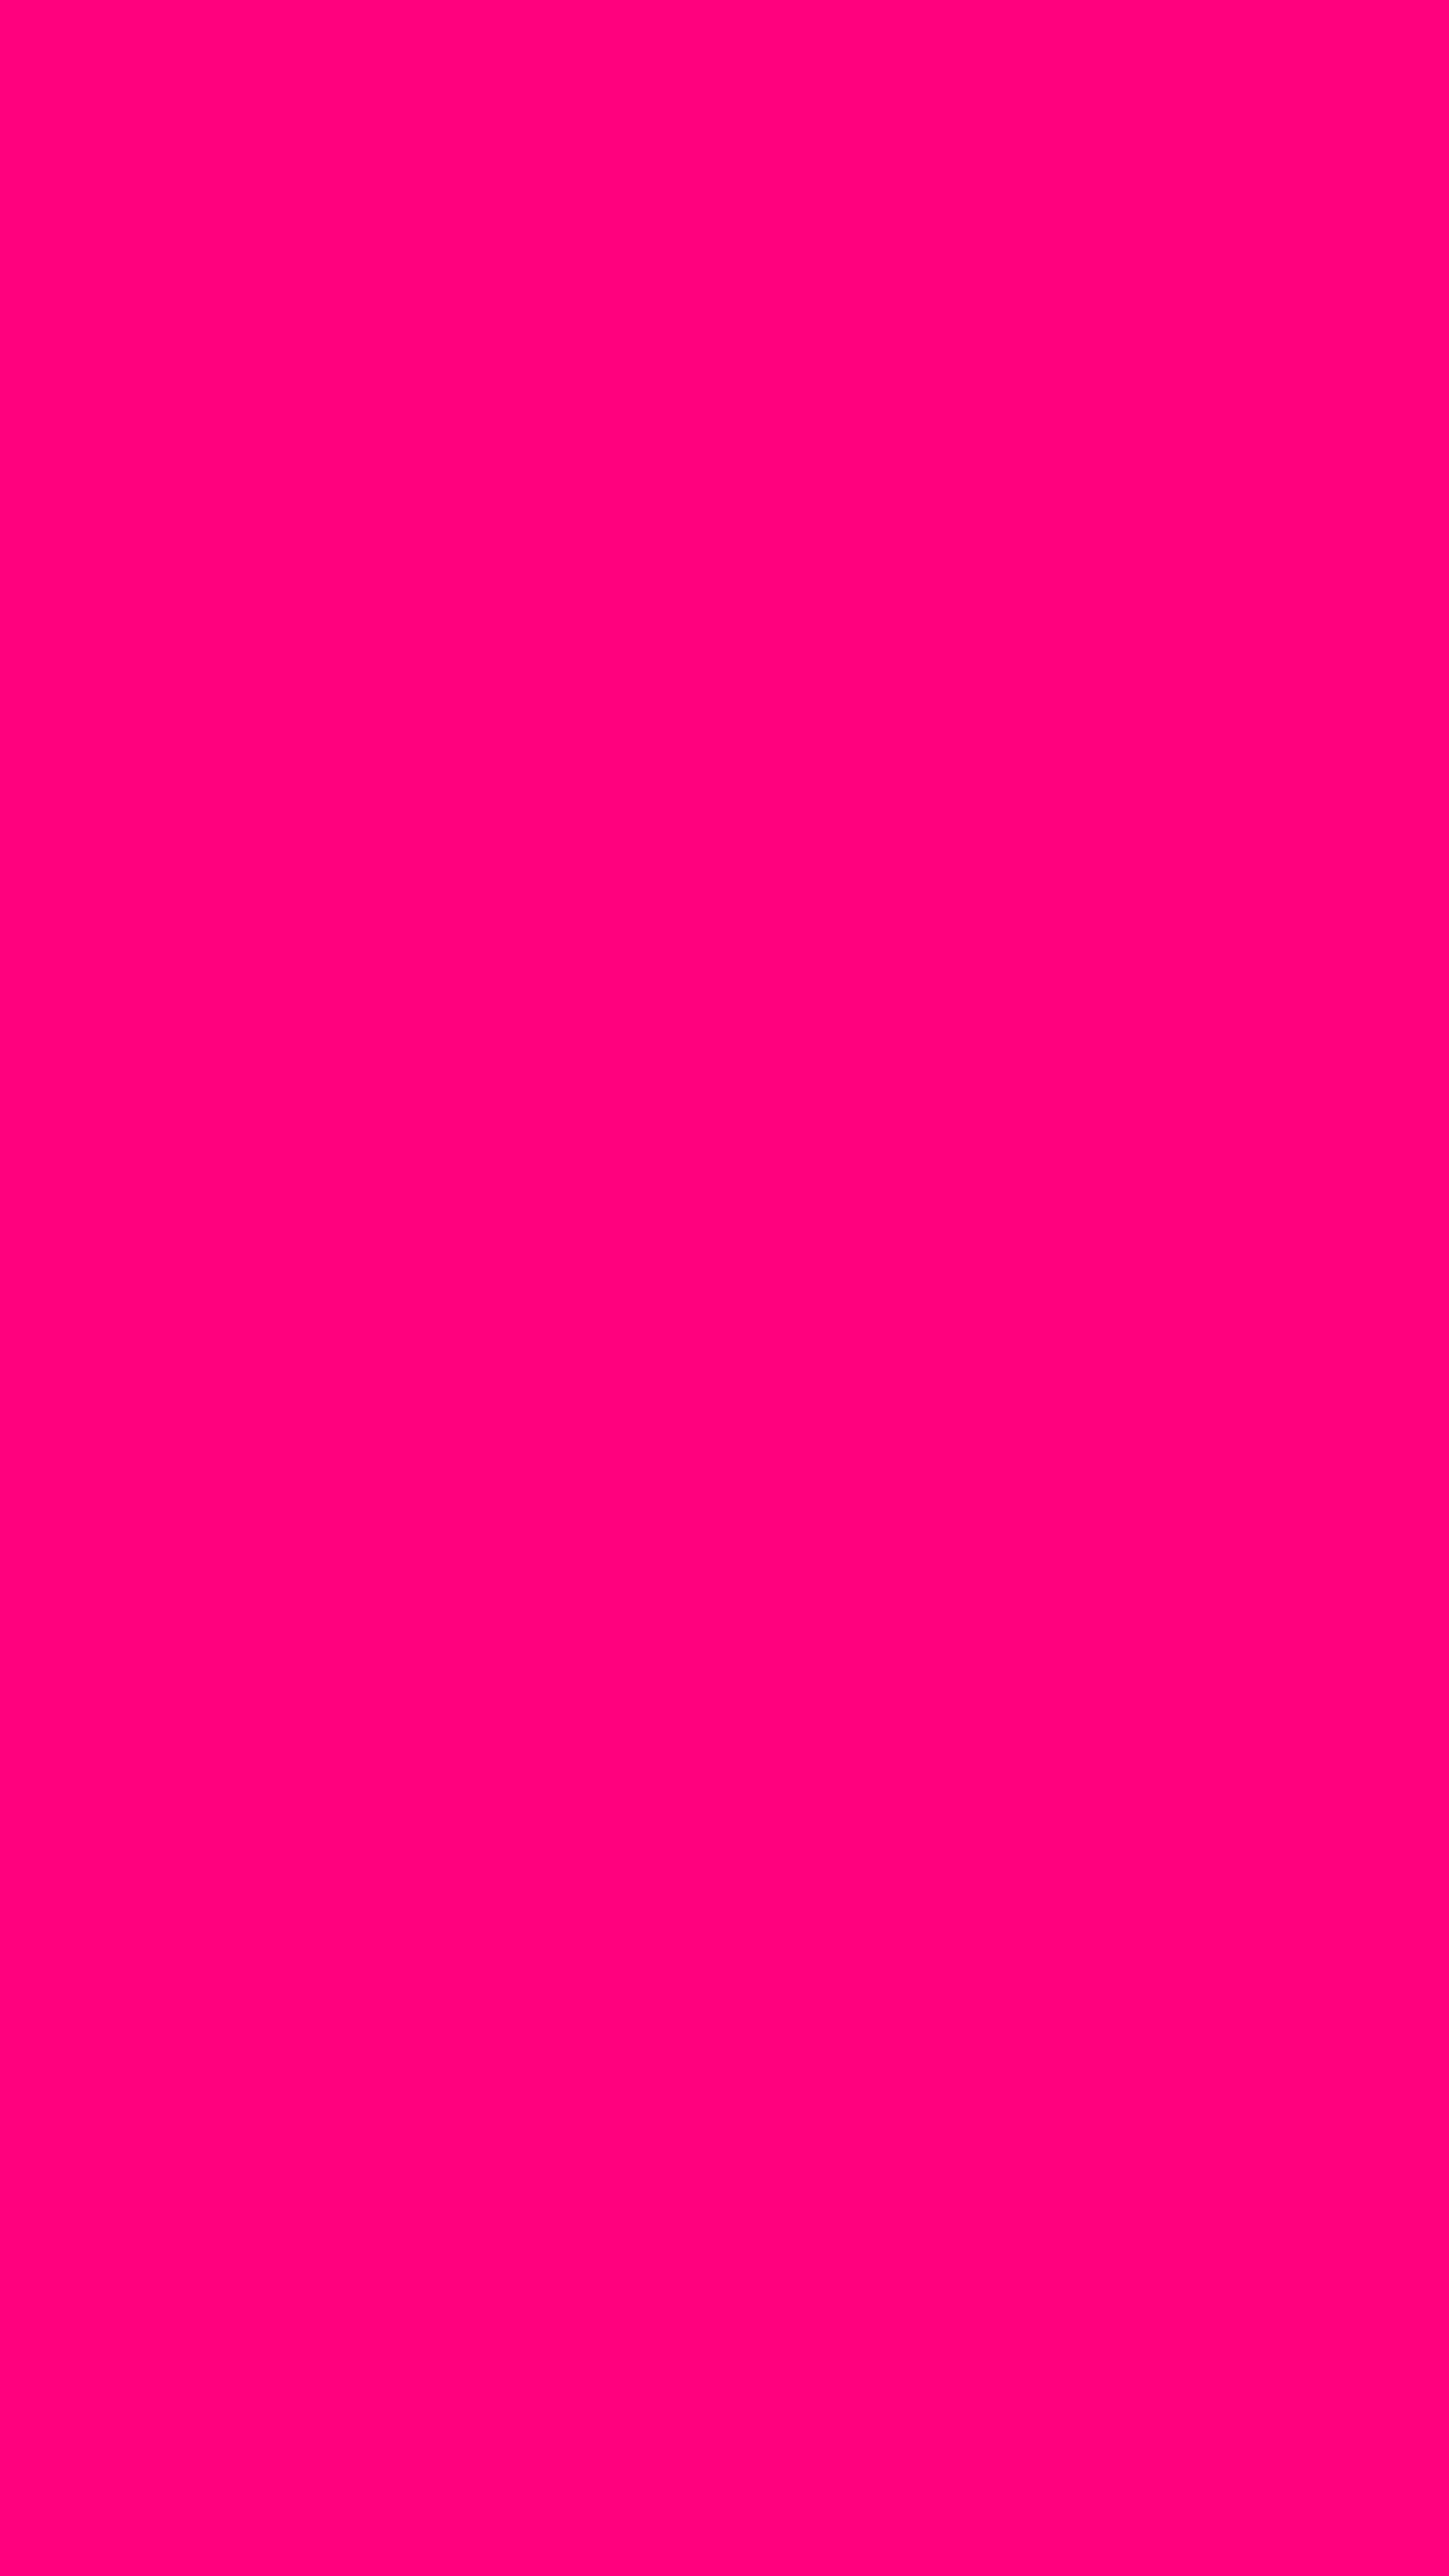 Bright Pink Solid Color Background Wallpaper for Mobile Phone